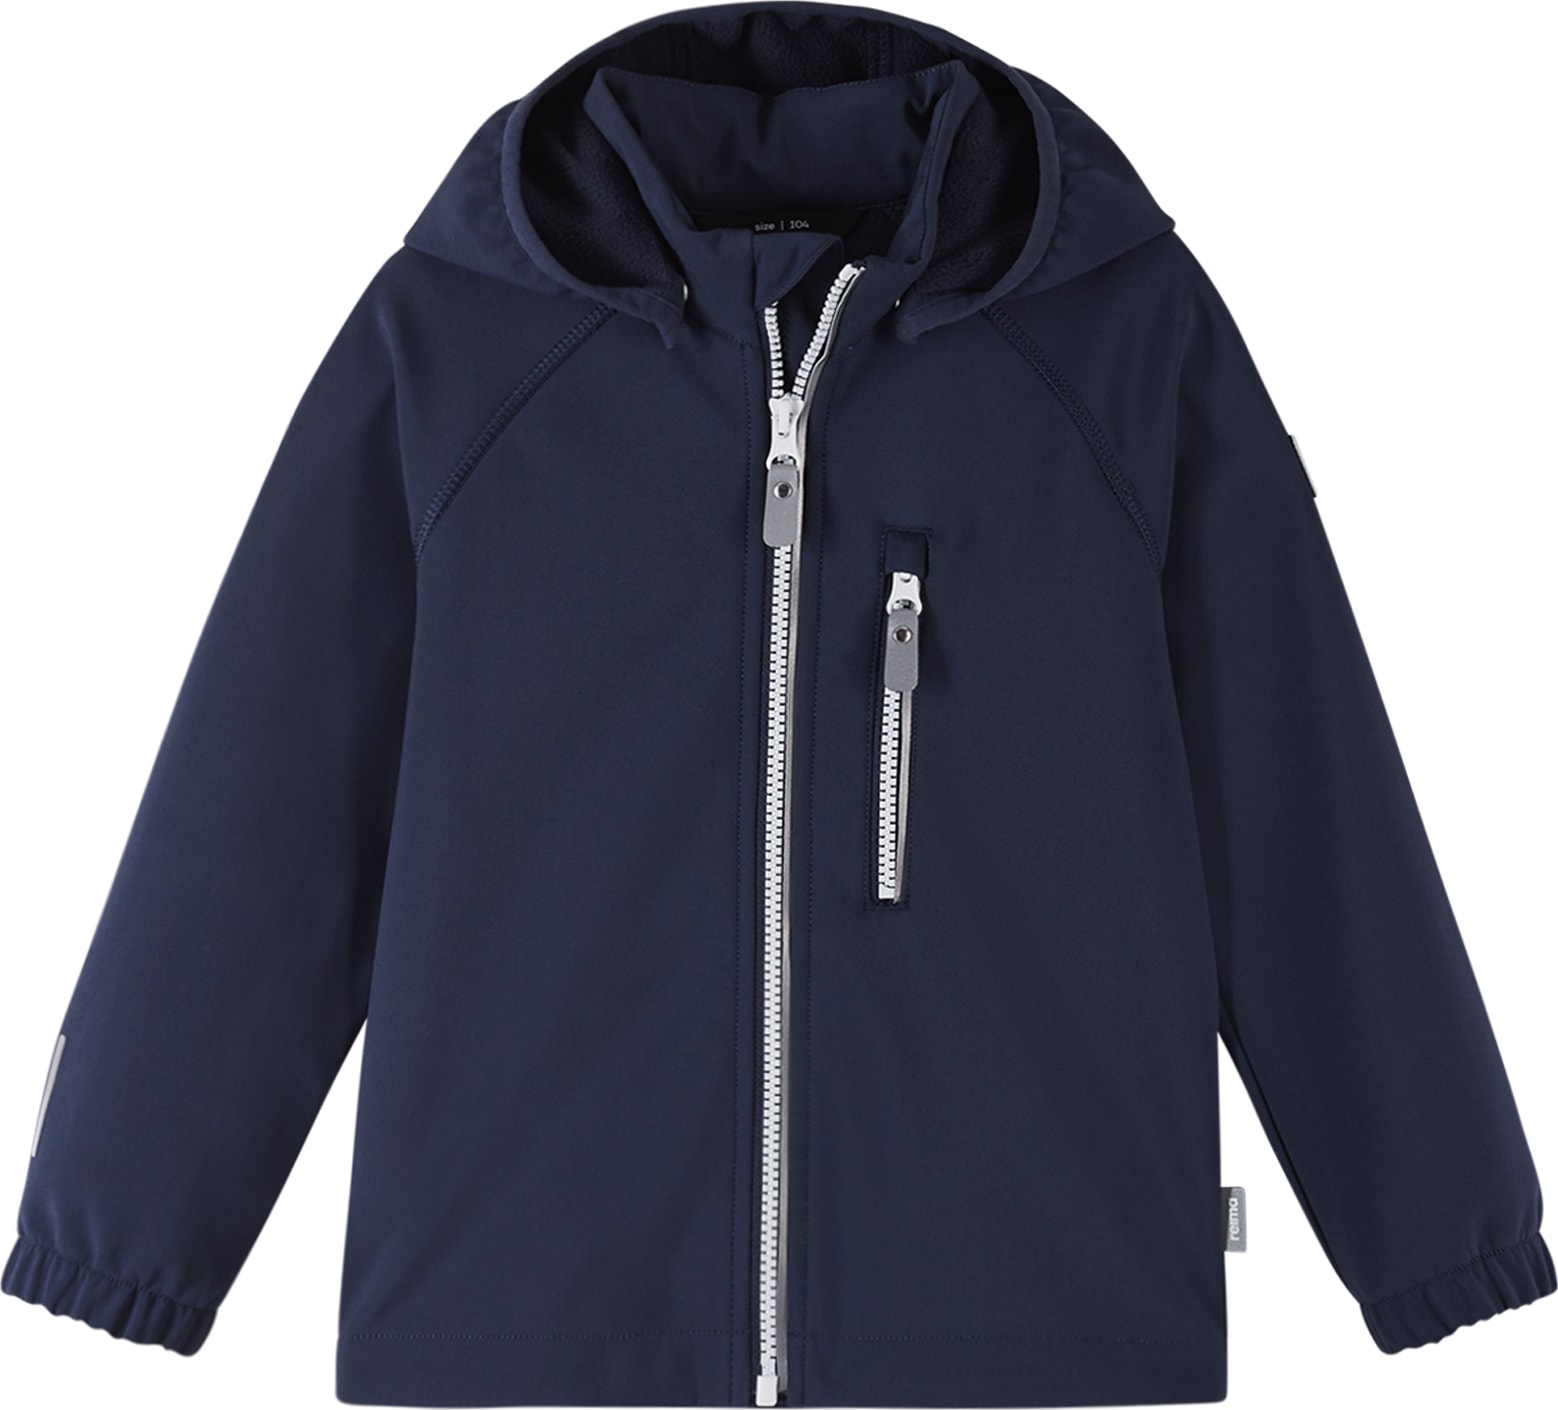 Buy Reima Kids' Softshell Jacket Vantti from Outnorth